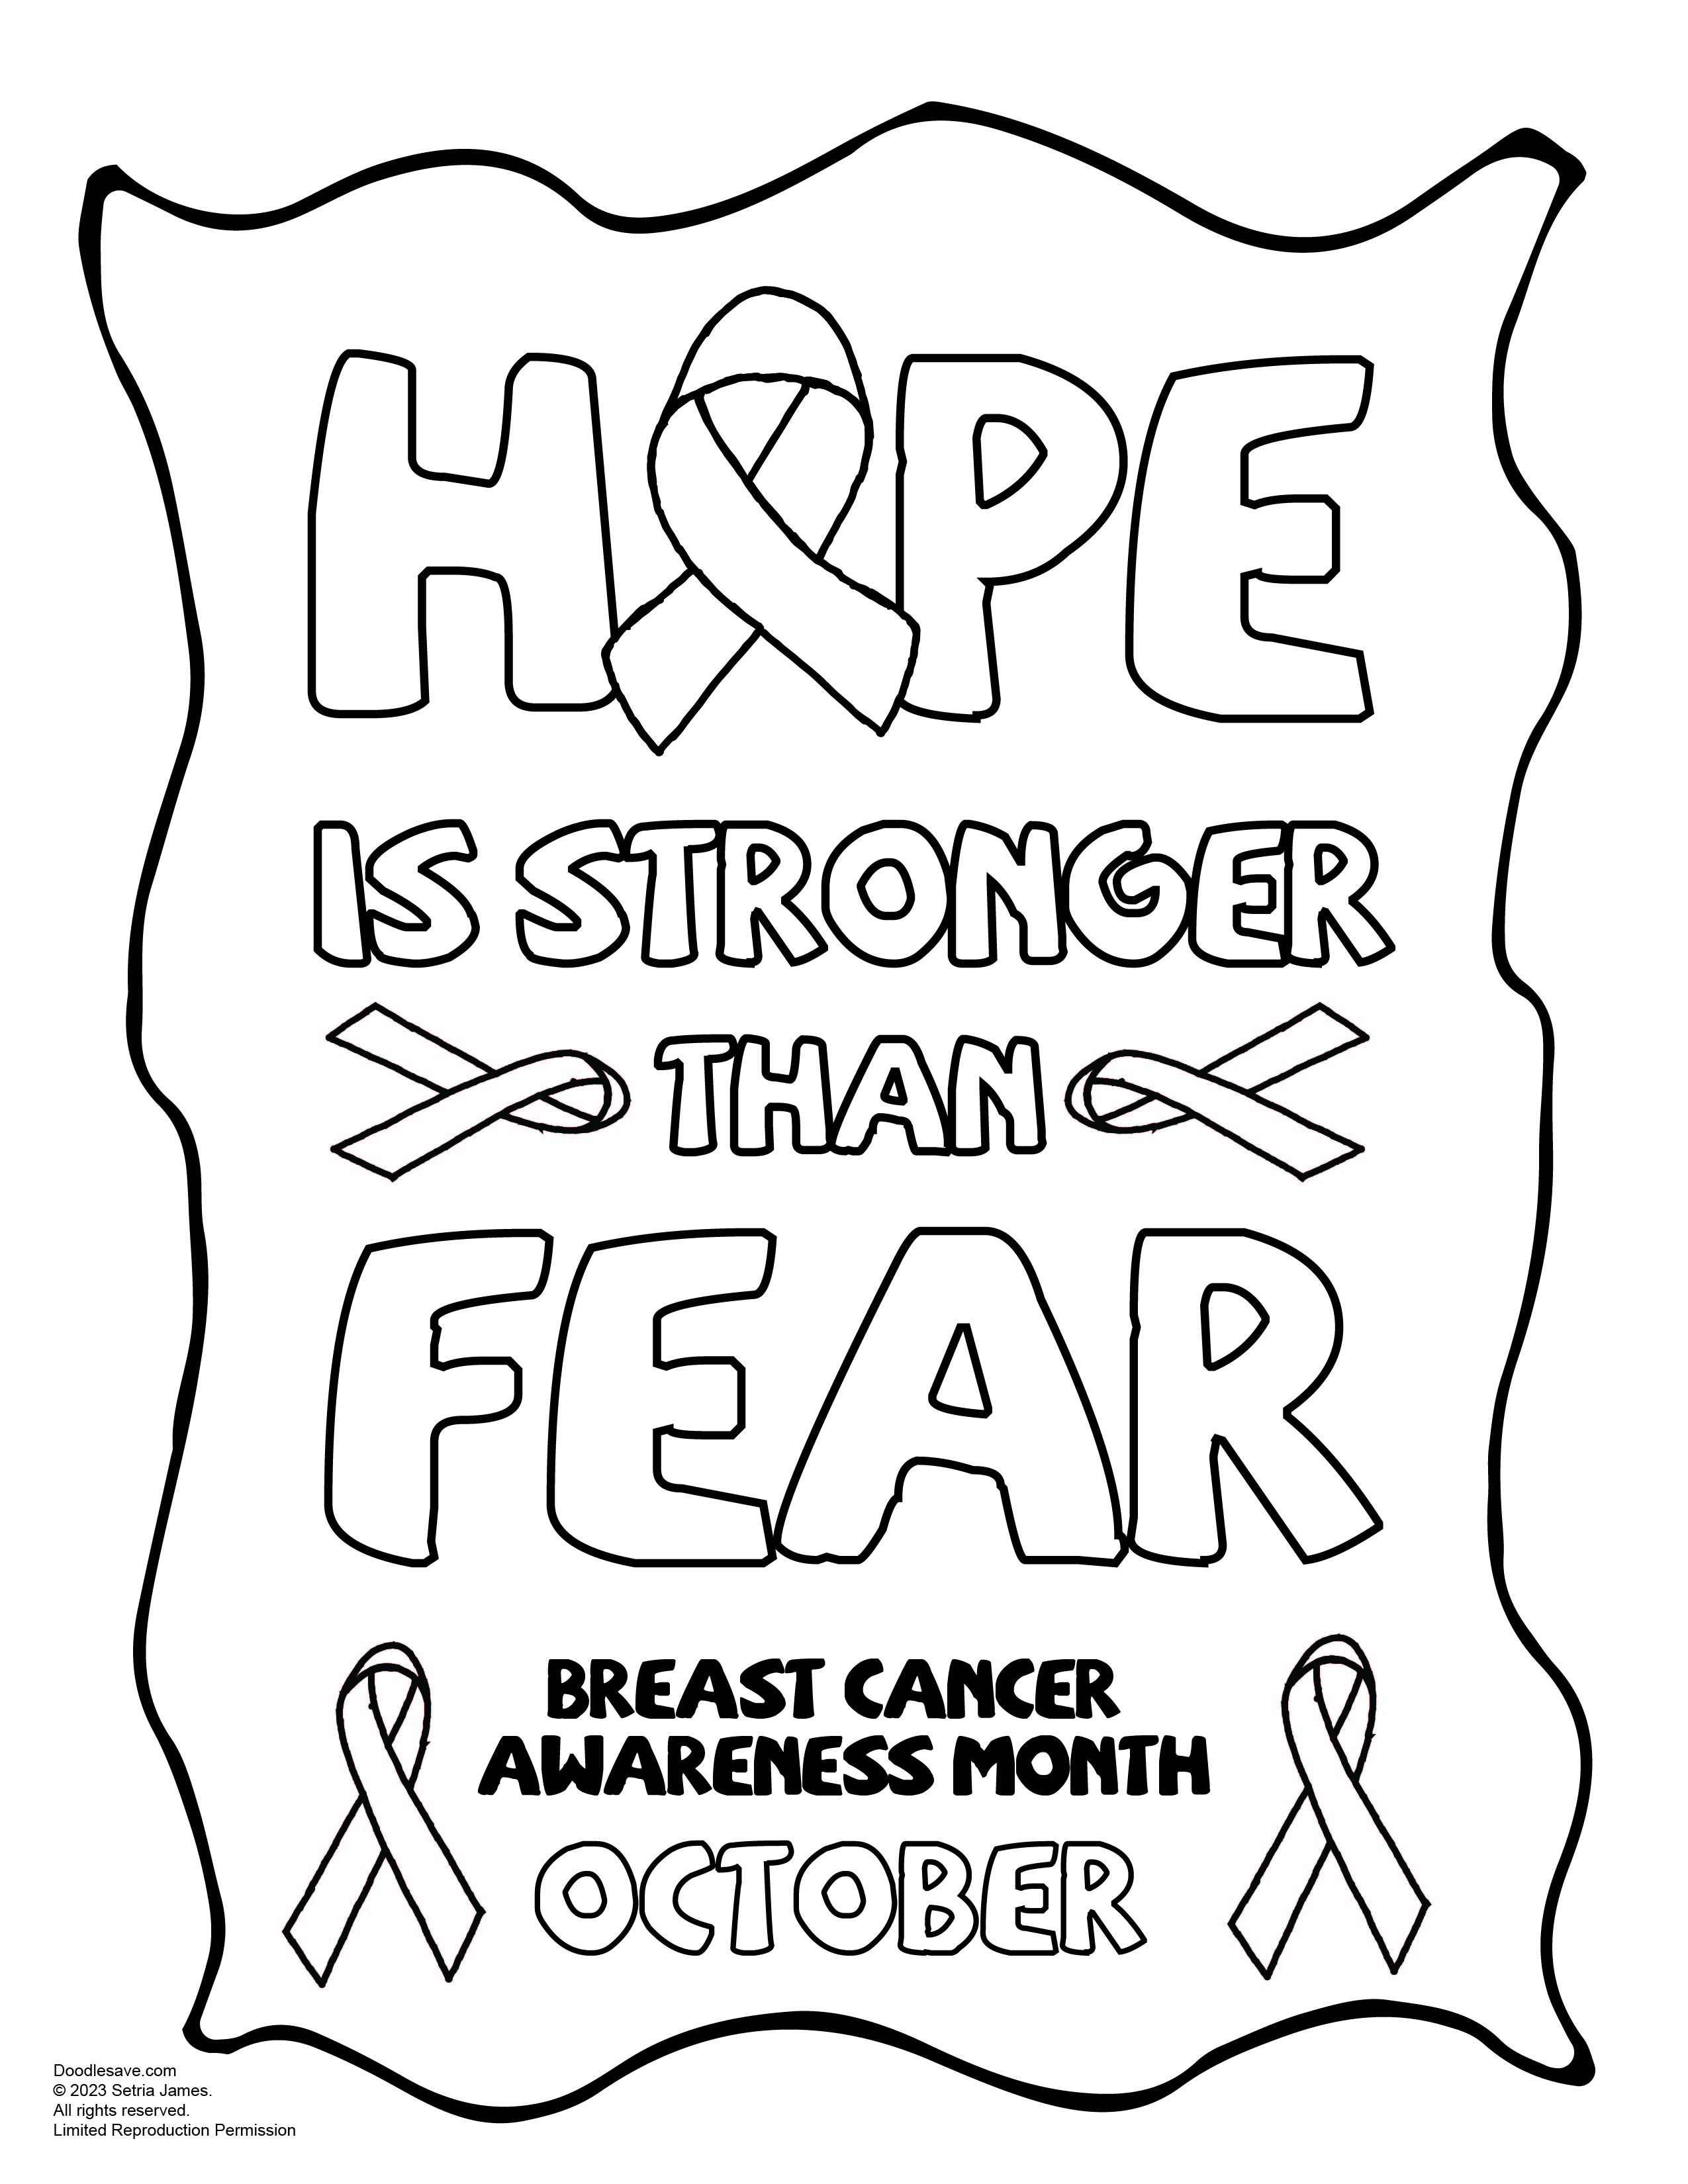 Printable breast cancer awareness coloring pages doodles ave